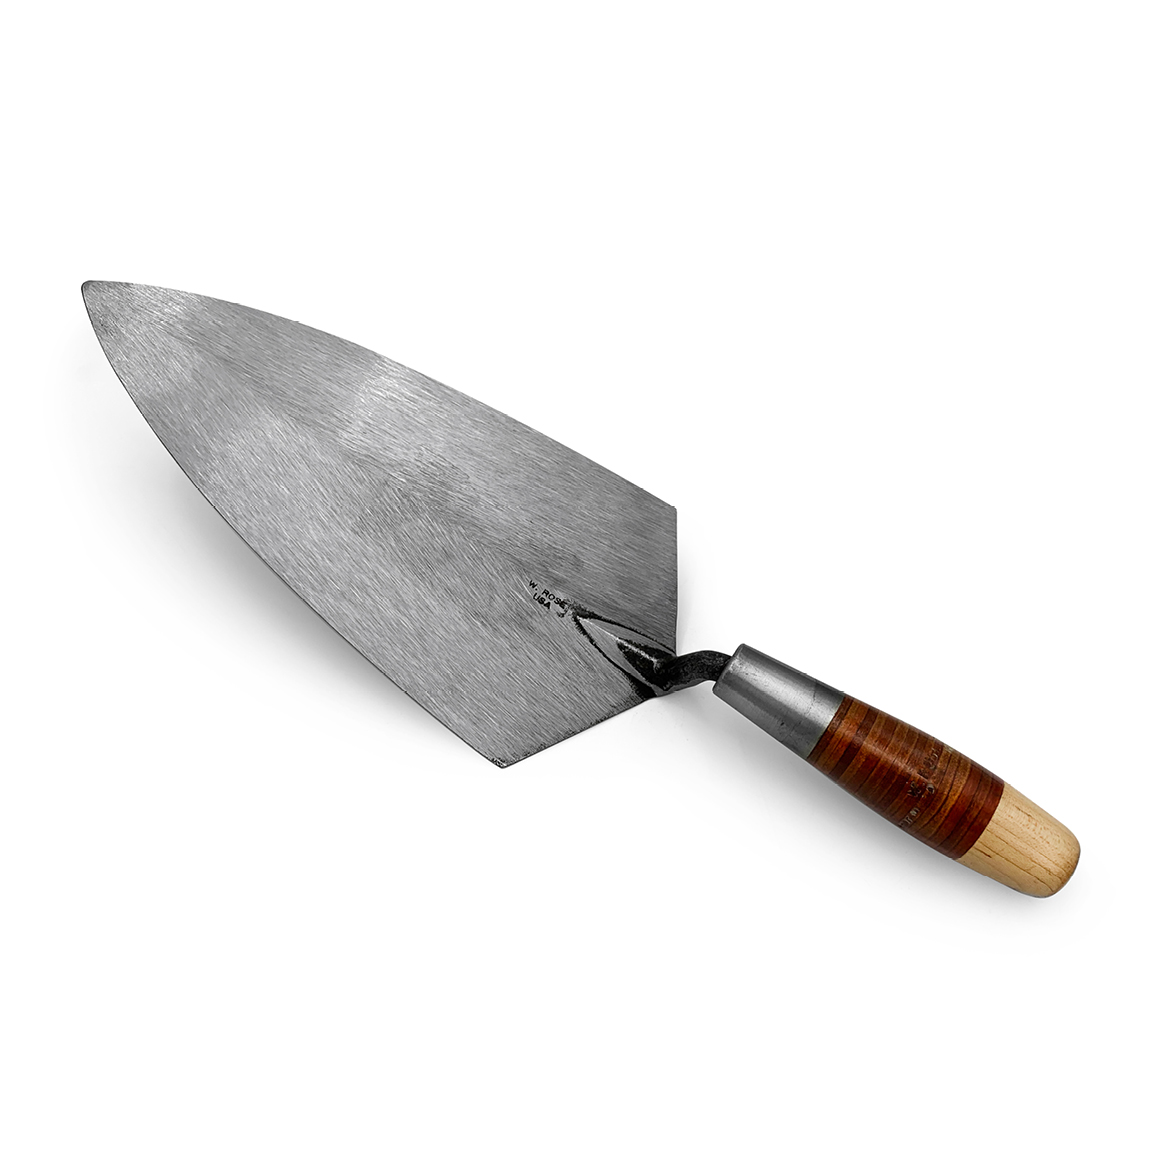 Philadelphia pattern with leather handle trowels made by W.Rose are supplied by Speedcrete, United Kingdom. The trowels are made from a single piece of forged crucible steel. Bricklayers tools.